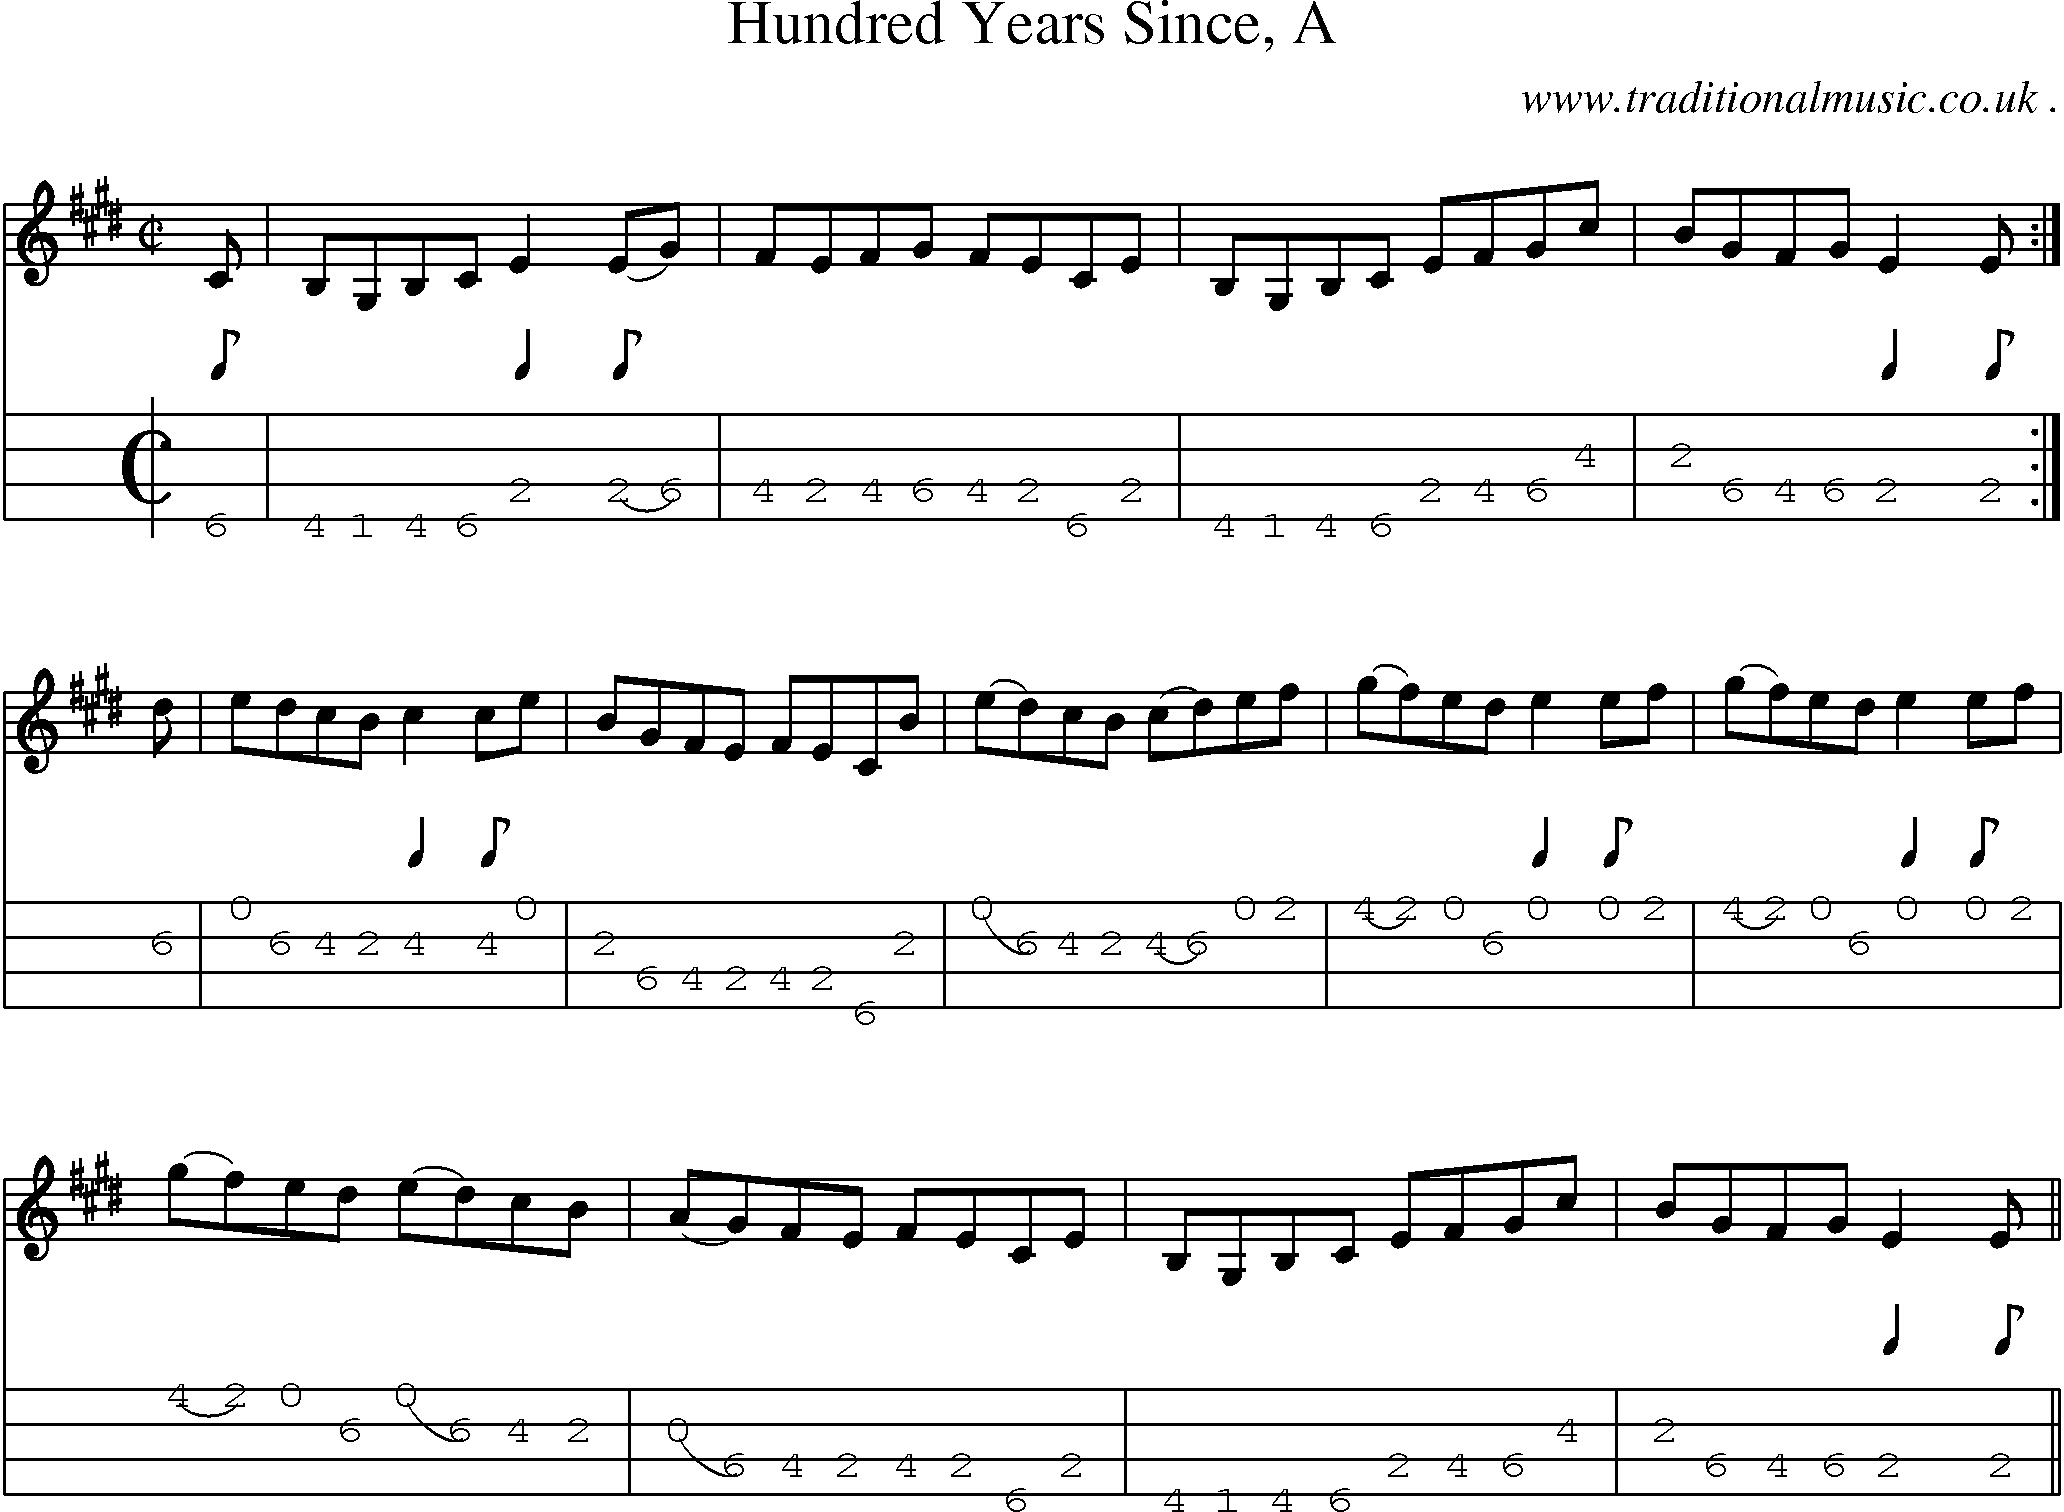 Sheet-music  score, Chords and Mandolin Tabs for Hundred Years Since A